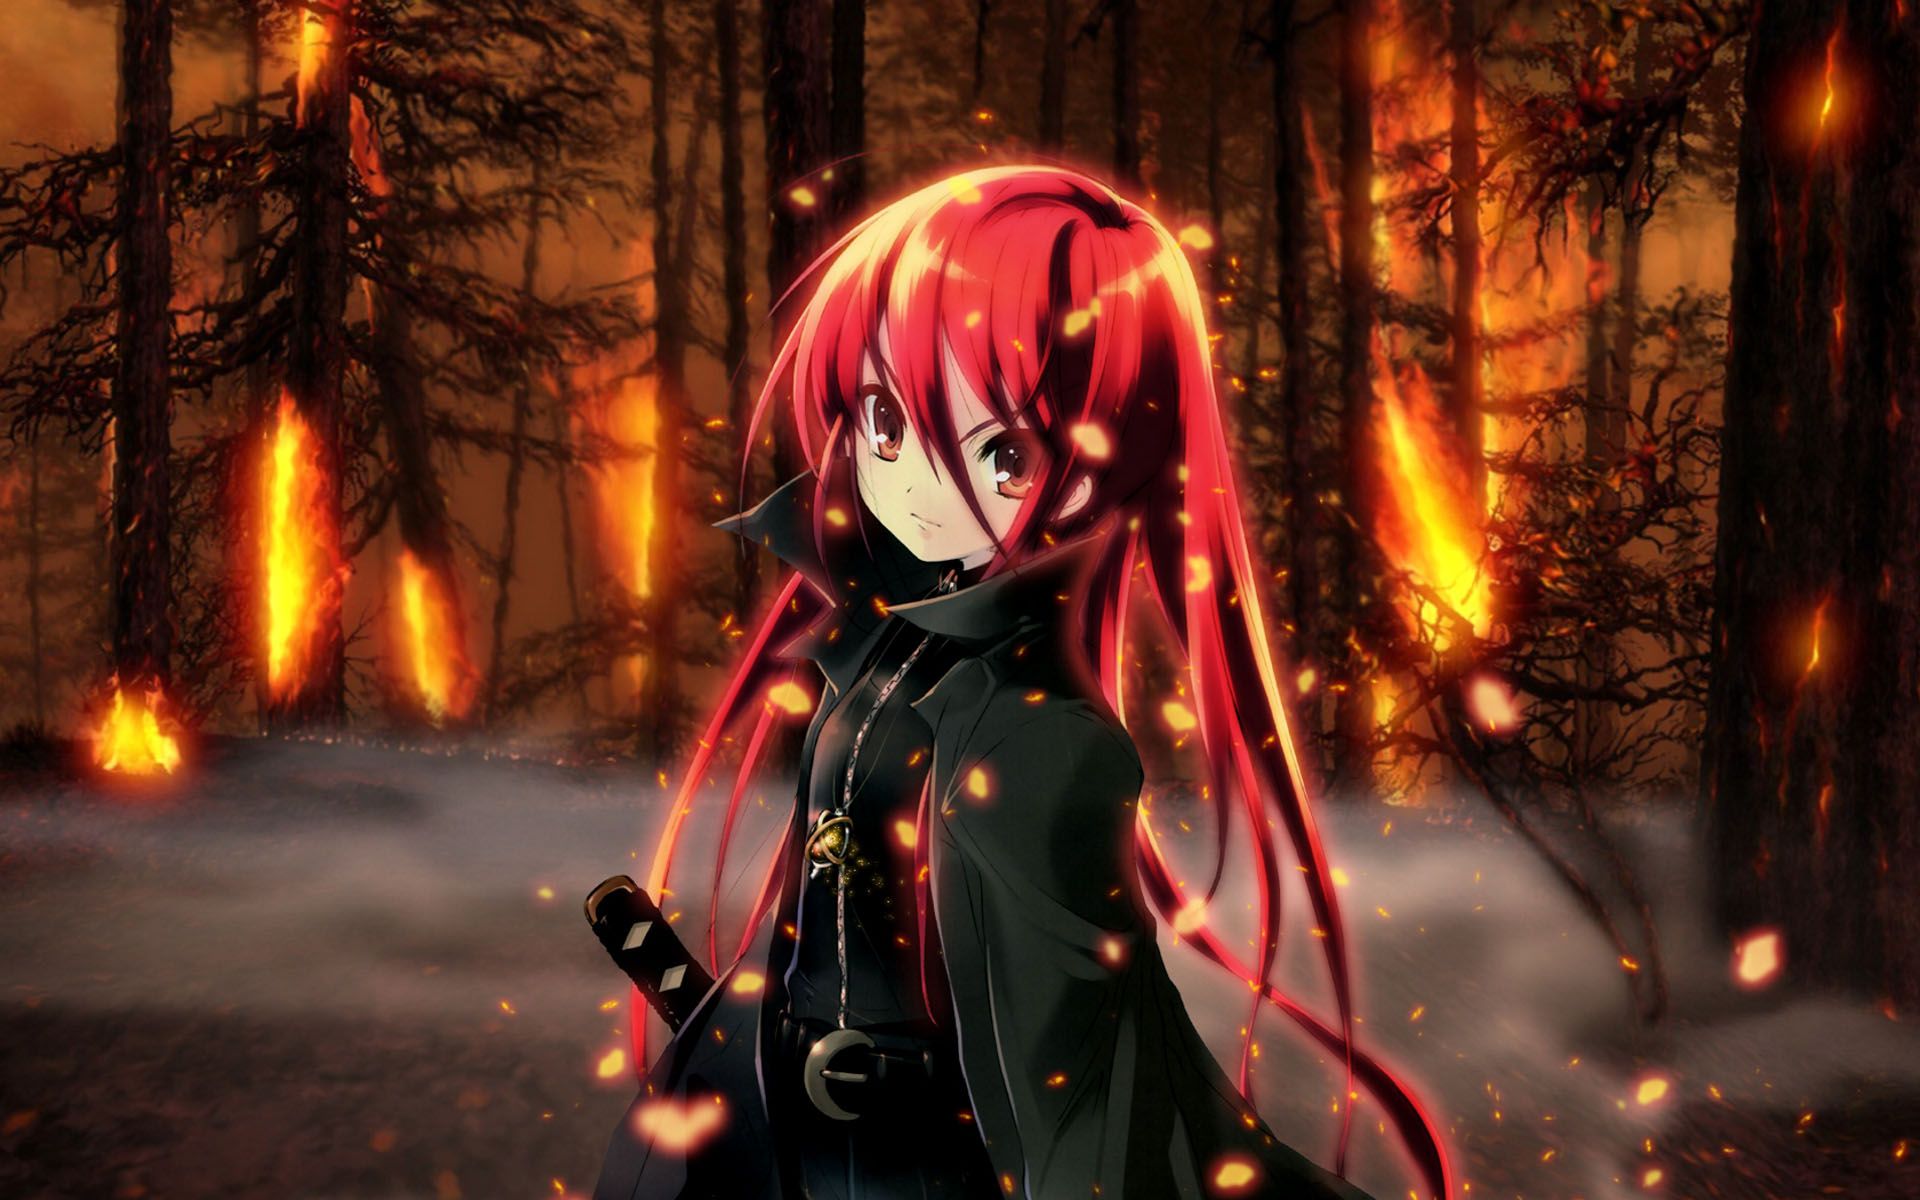 Free download Image Anime girl with red hair and a sword wallpaper